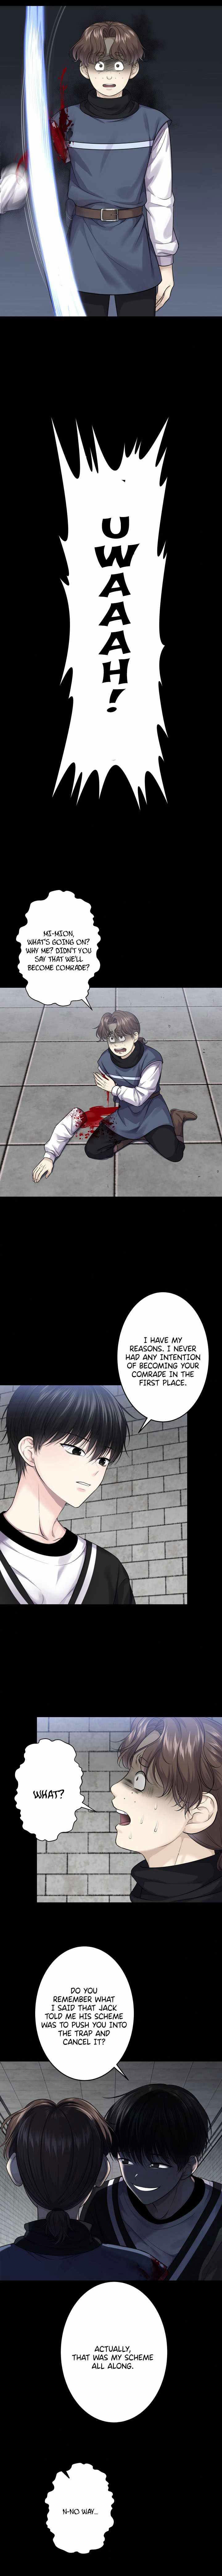 The Absolute God’s Game Chapter 13 page 9